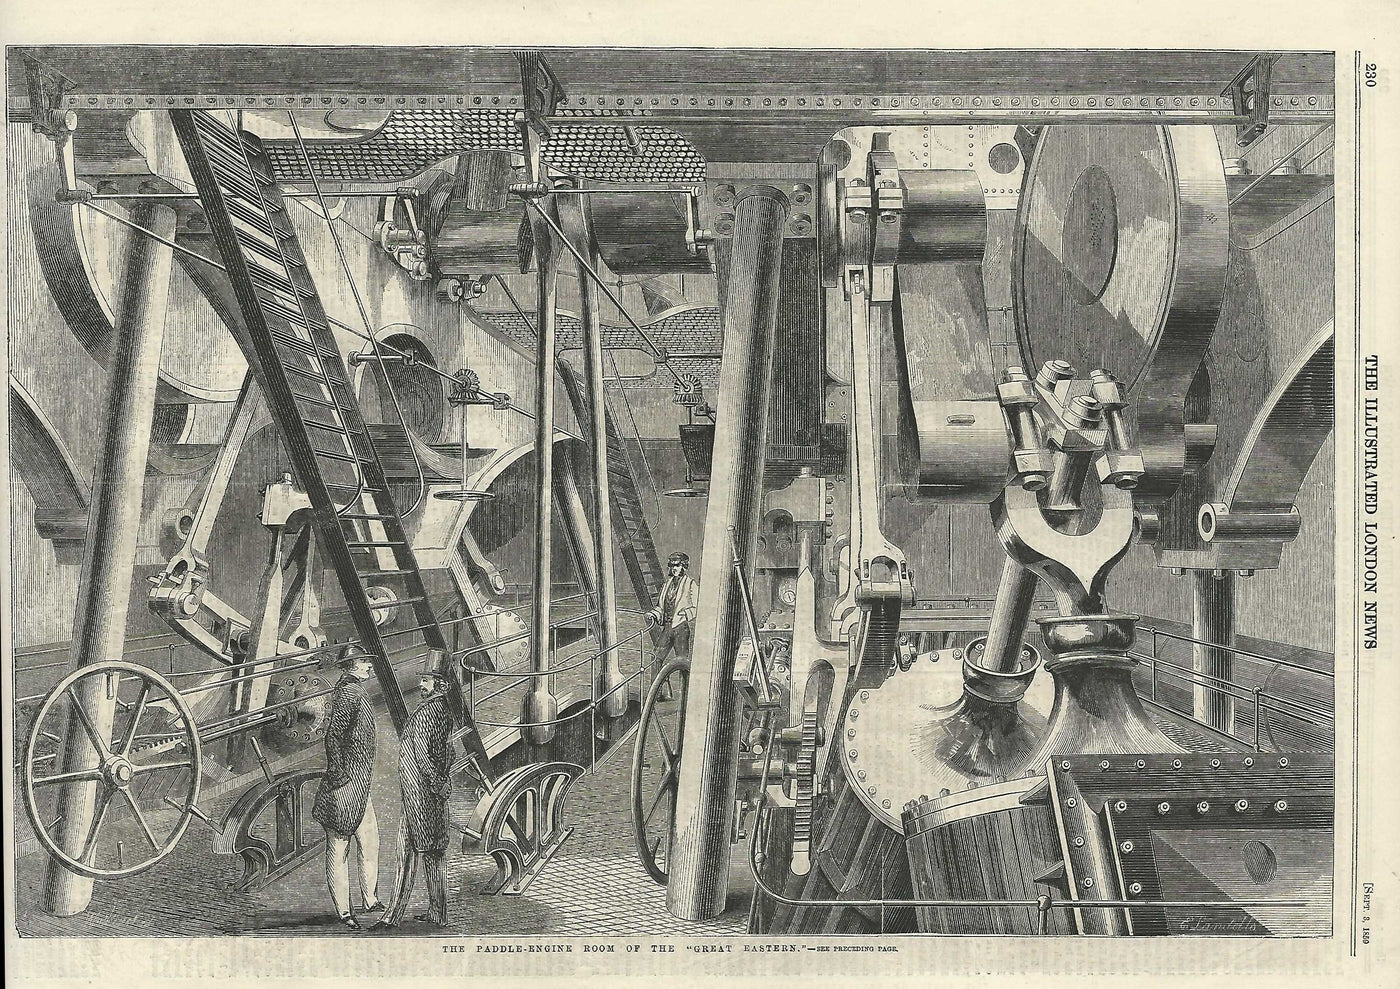 Great Eastern steamship's paddle-engine room antique print 1859